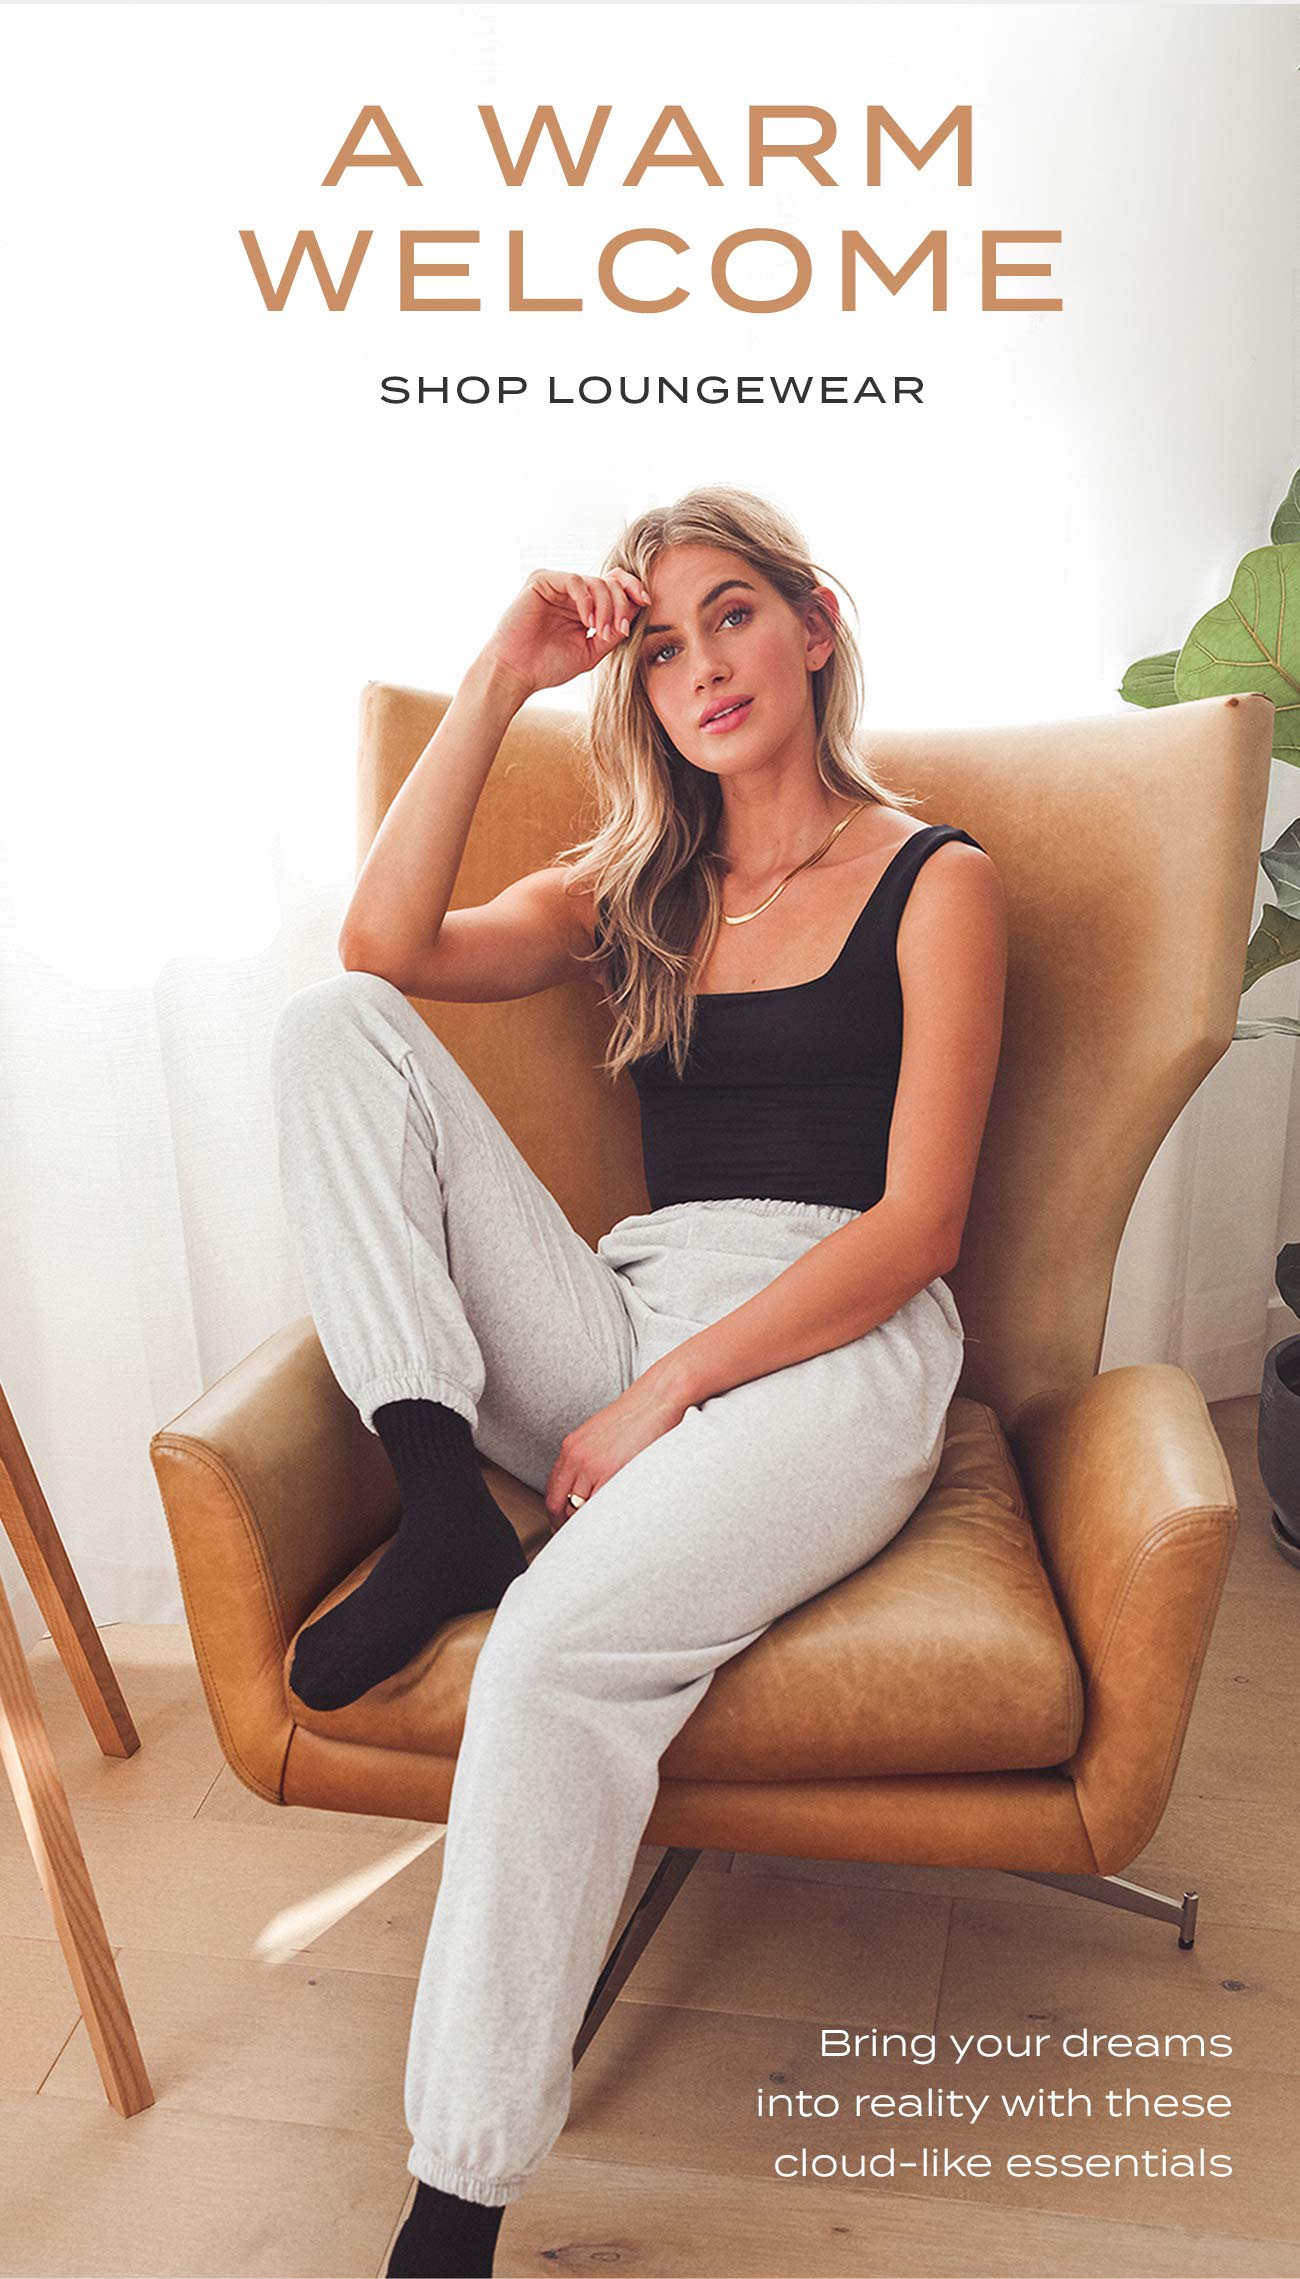 Women's Fashion Discounts: Introducing A New Level Of Loungewear...